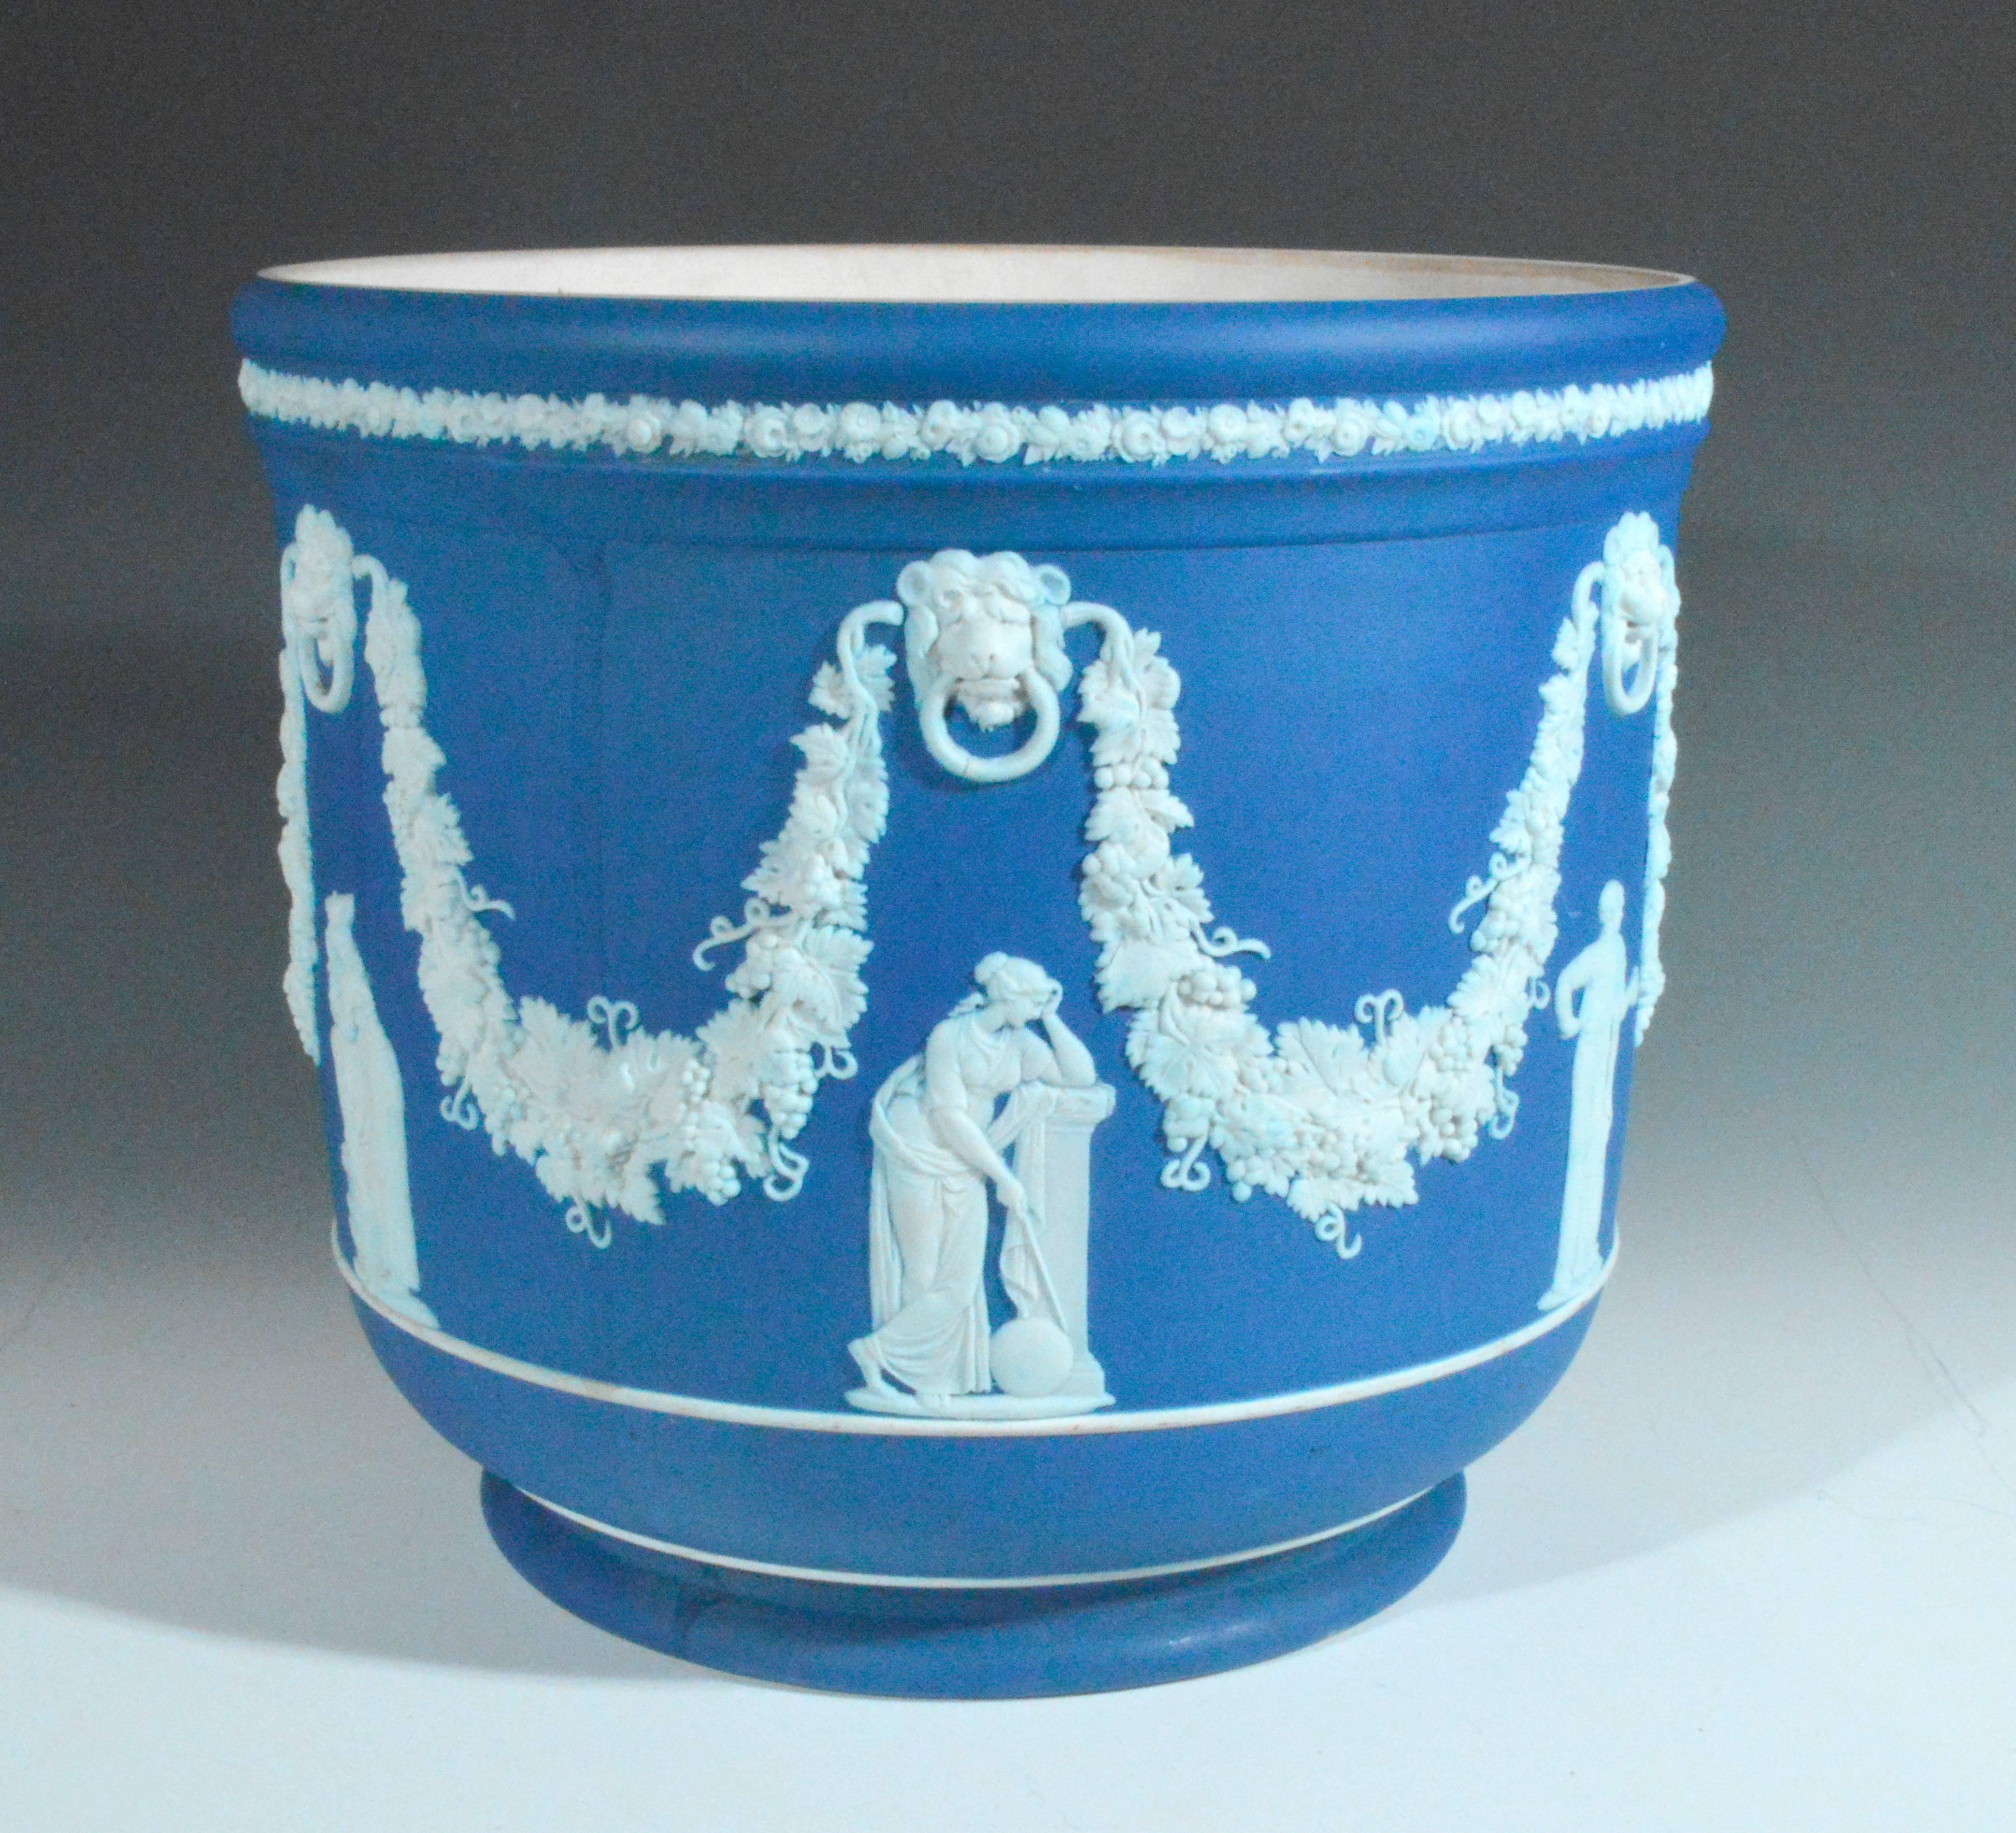 The large pot is unglazed on the interior. The pot is decorated in a blue jasper with applied figures to six sides. Above each figure is an applied white lion with a vine leaf swag issuing from behind his head with large leaves and bunches of